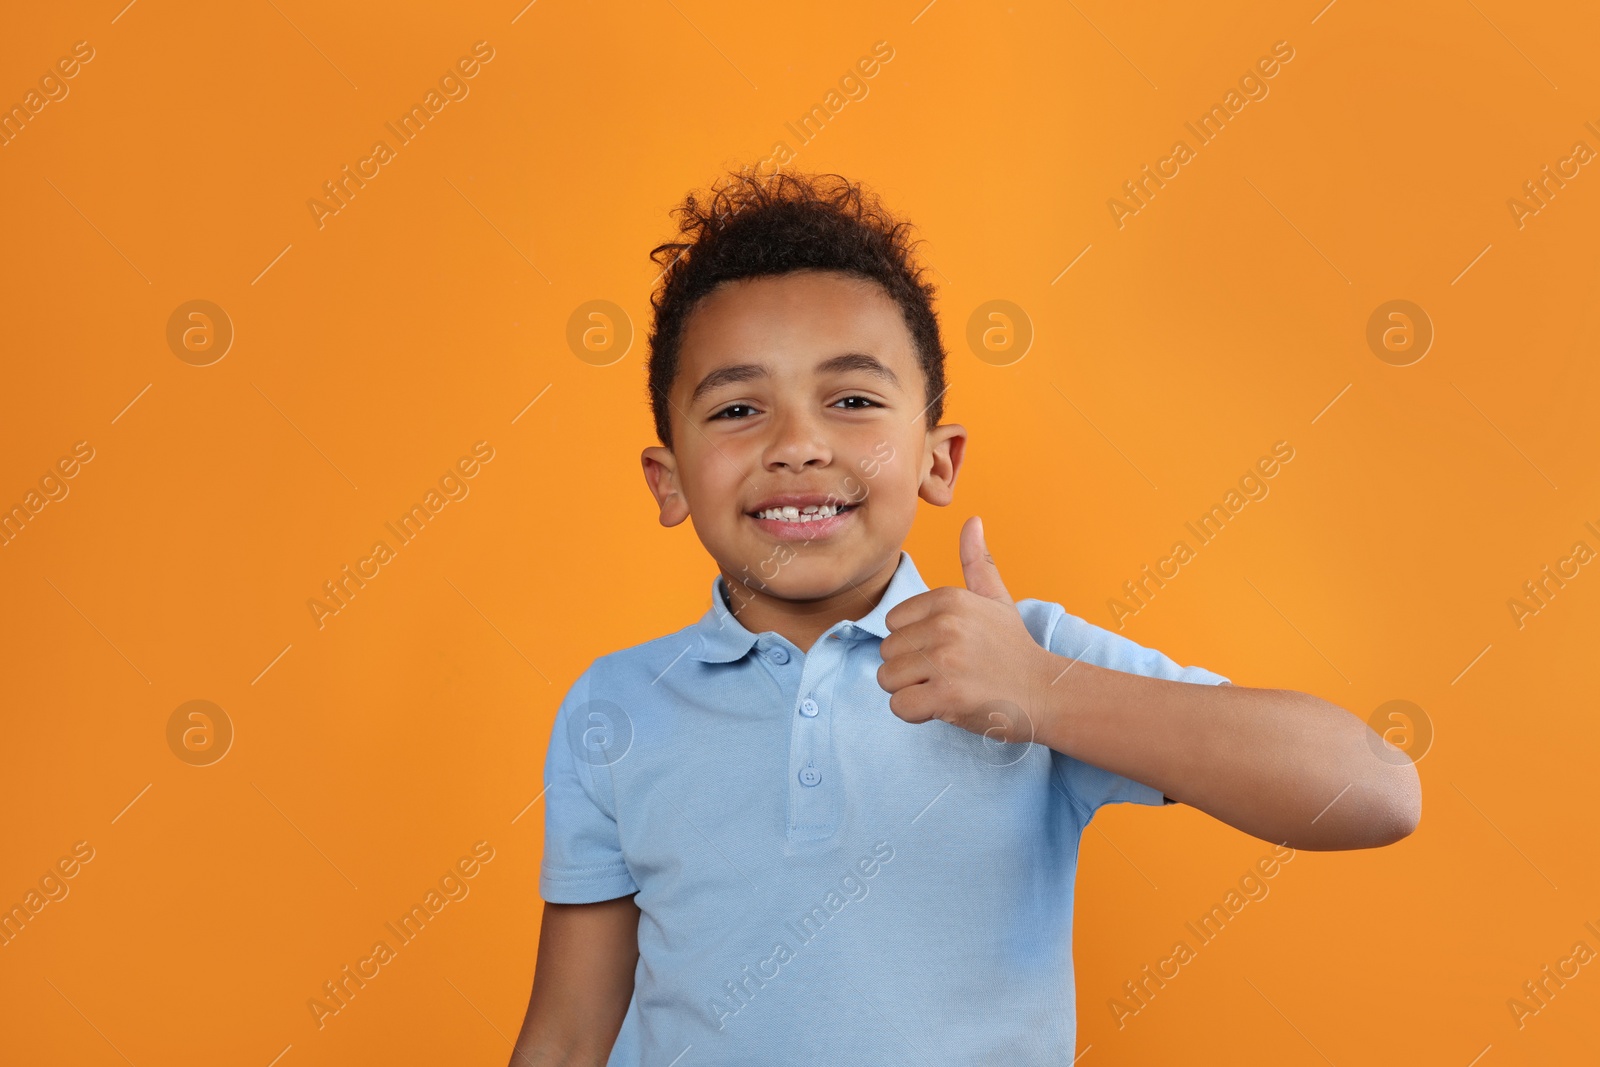 Photo of African-American boy showing thumb up on orange background